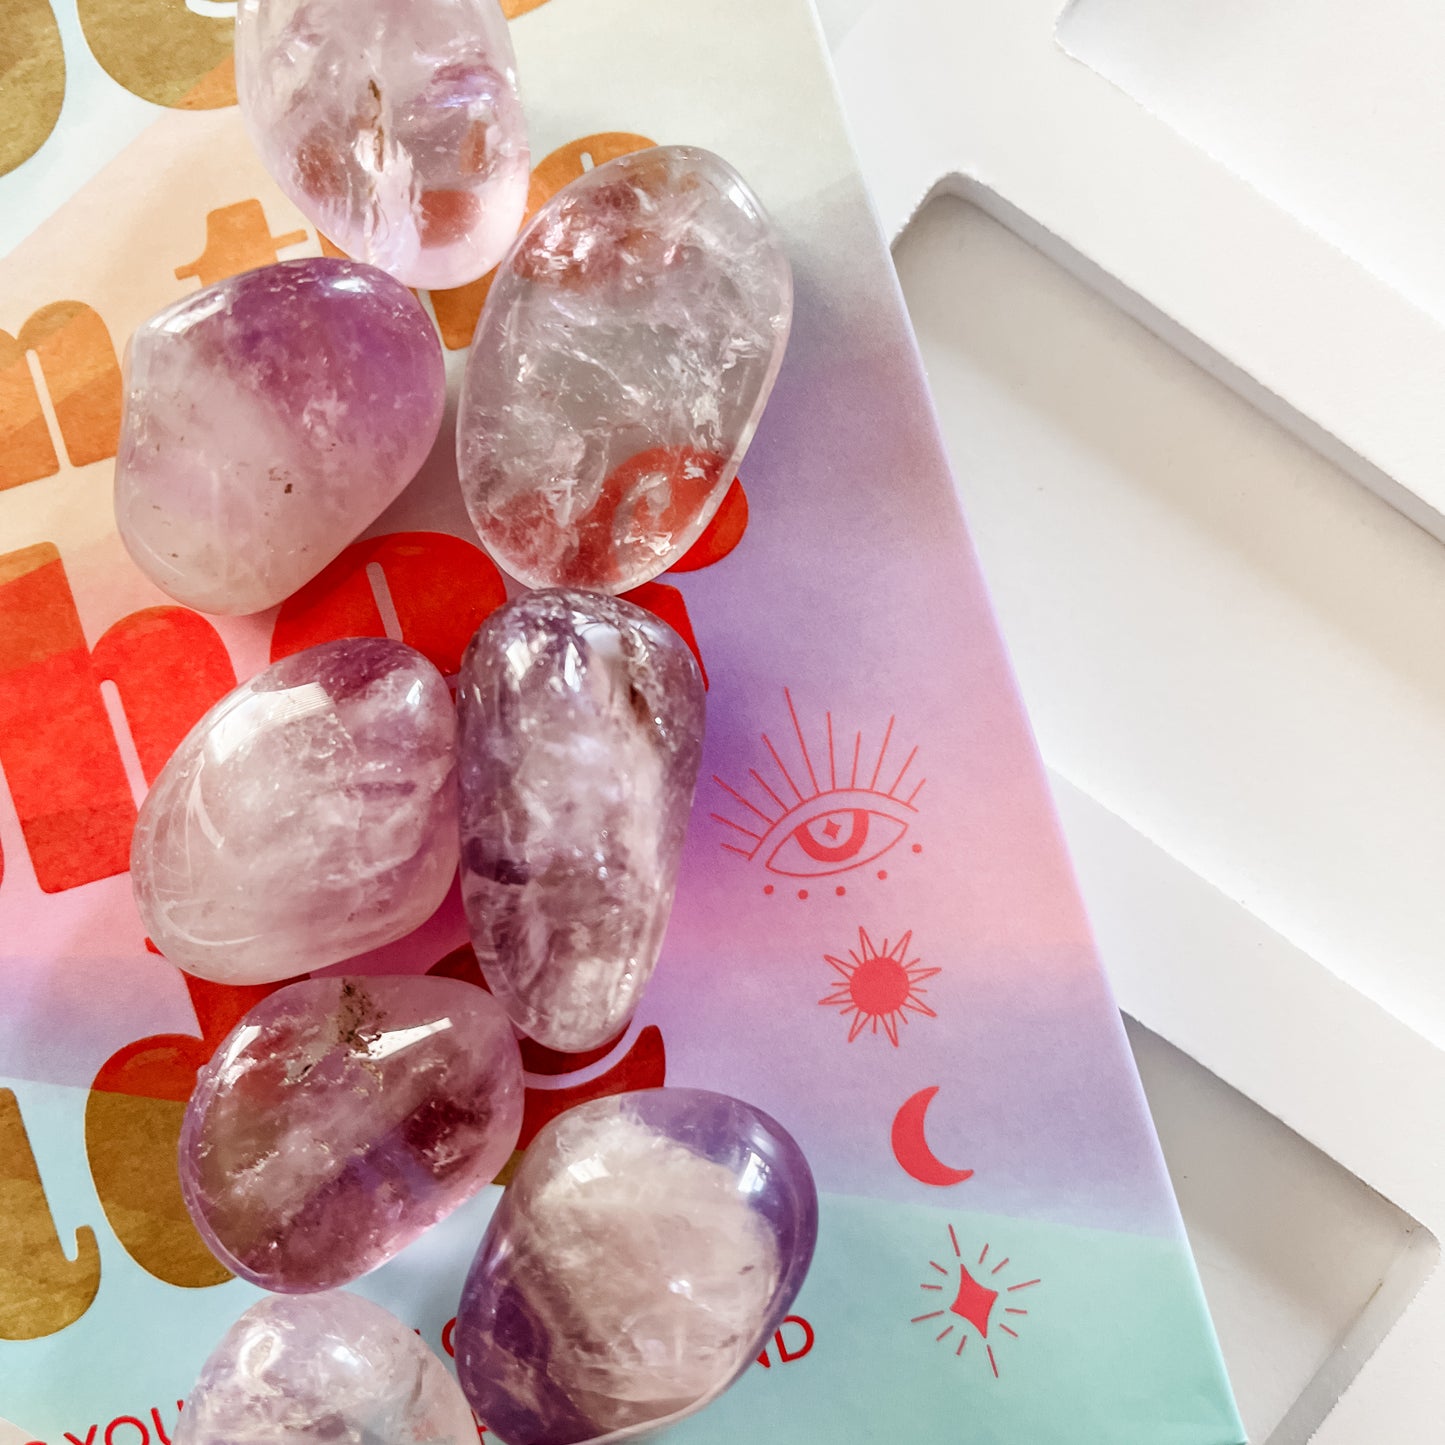 Amethyst Tumbled Stone - Amethyst Crystal - Protection, Cleansing, Intuition